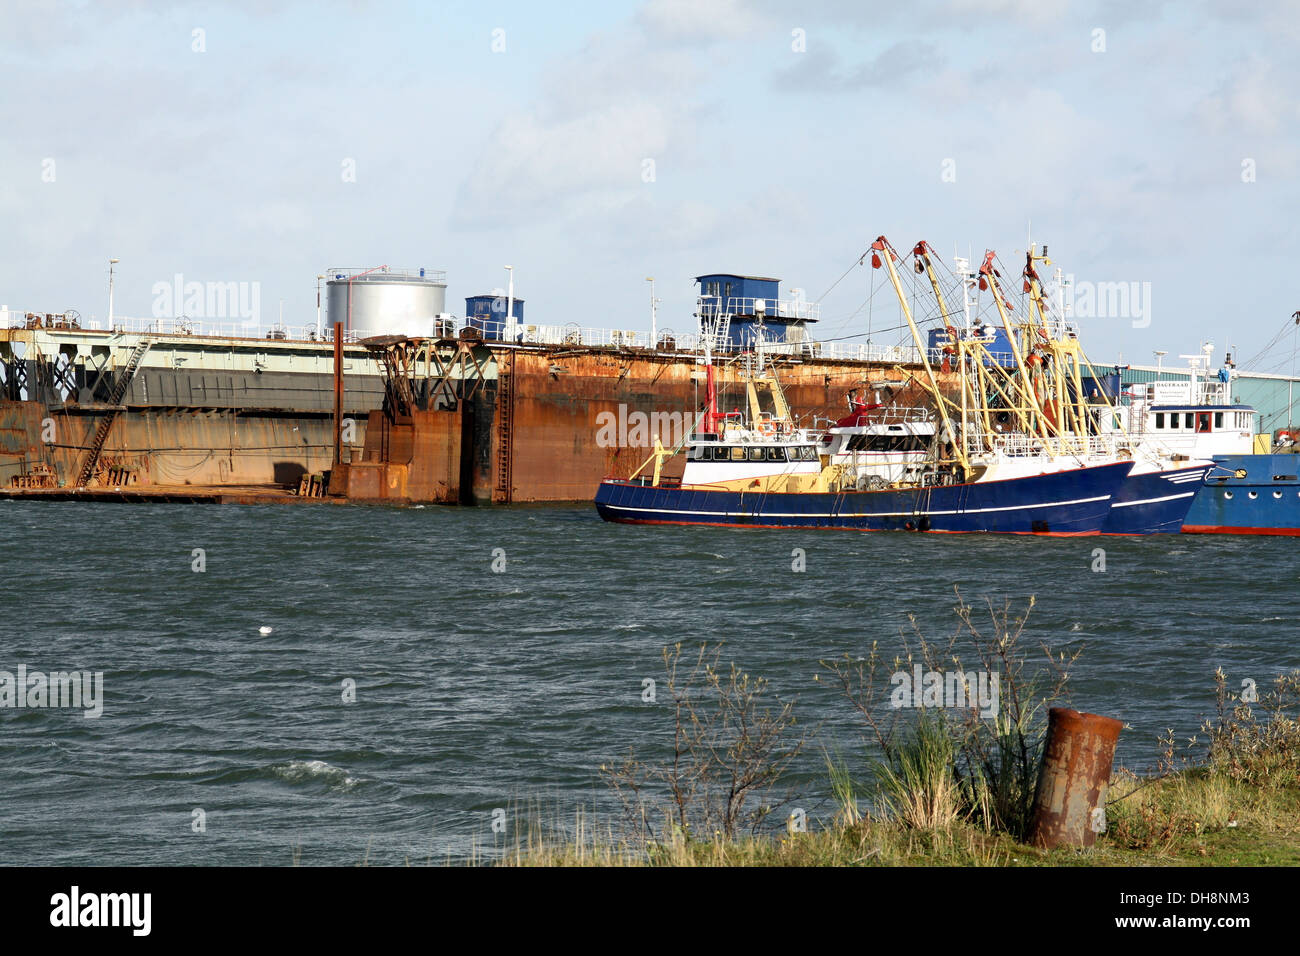 Fishing boats lying at a dry dock for repairs at the port of Lauwersoog Stock Photo